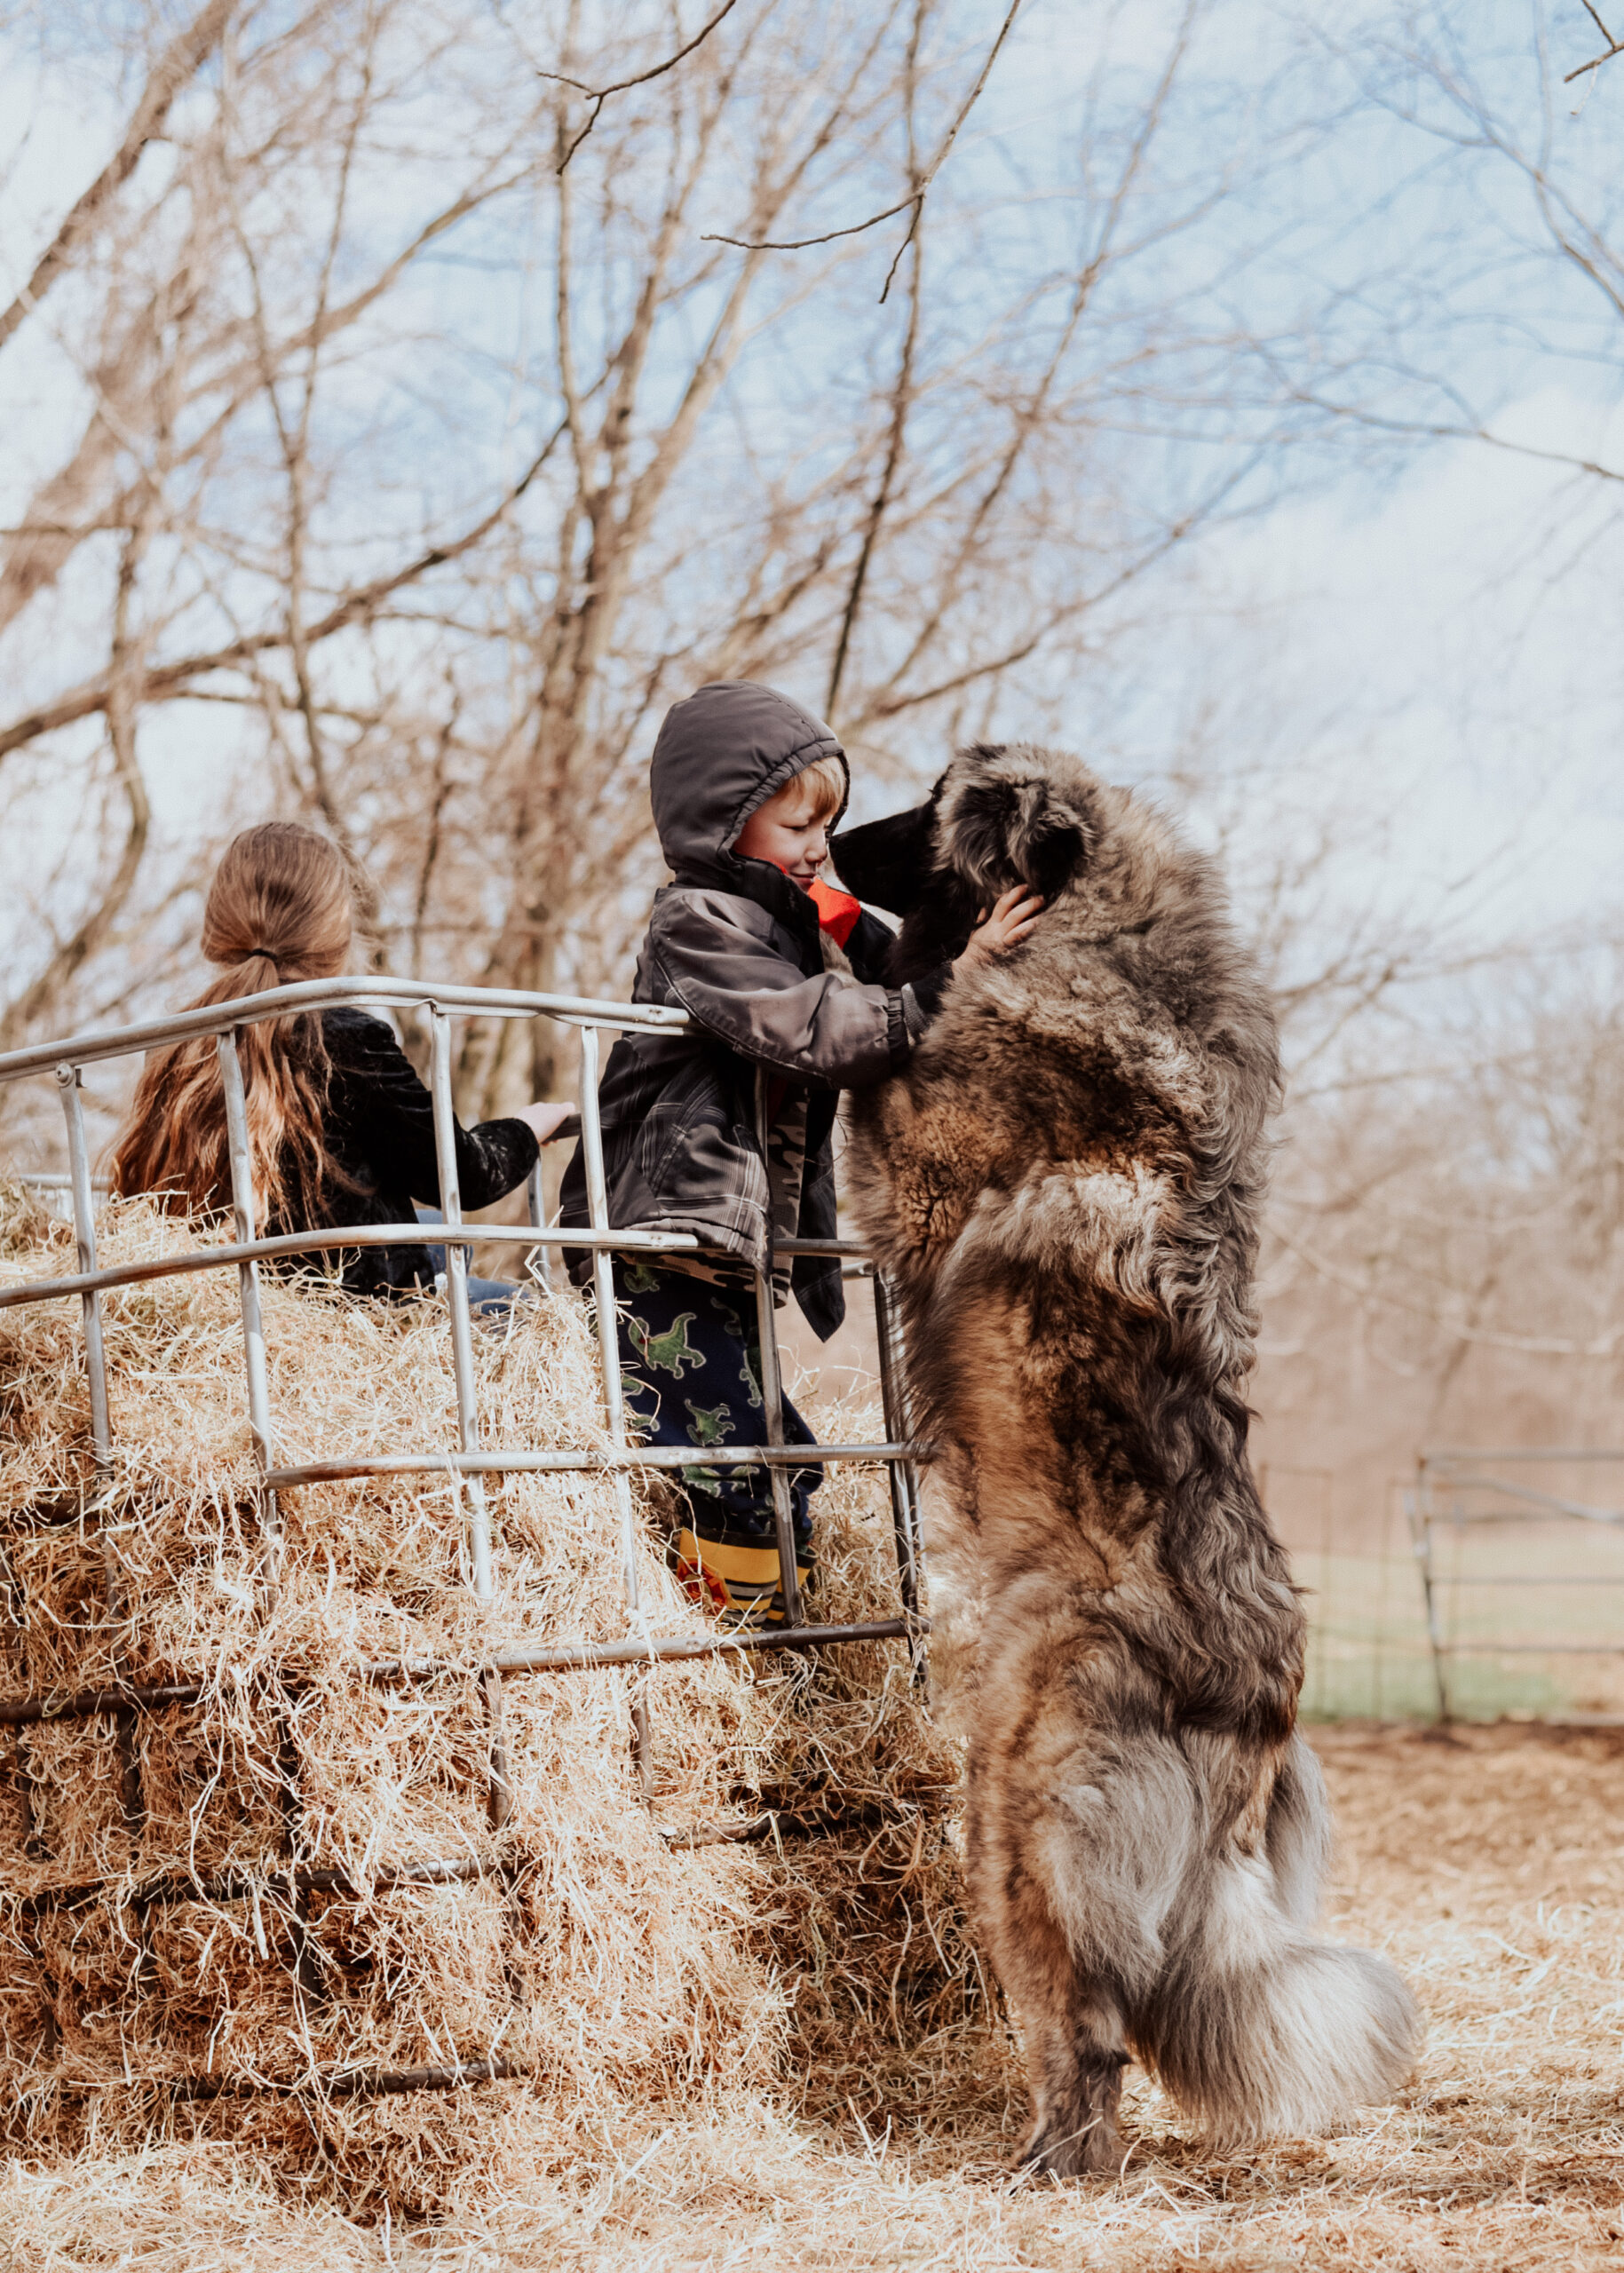 brindle estrela mountain dog standing up with a child